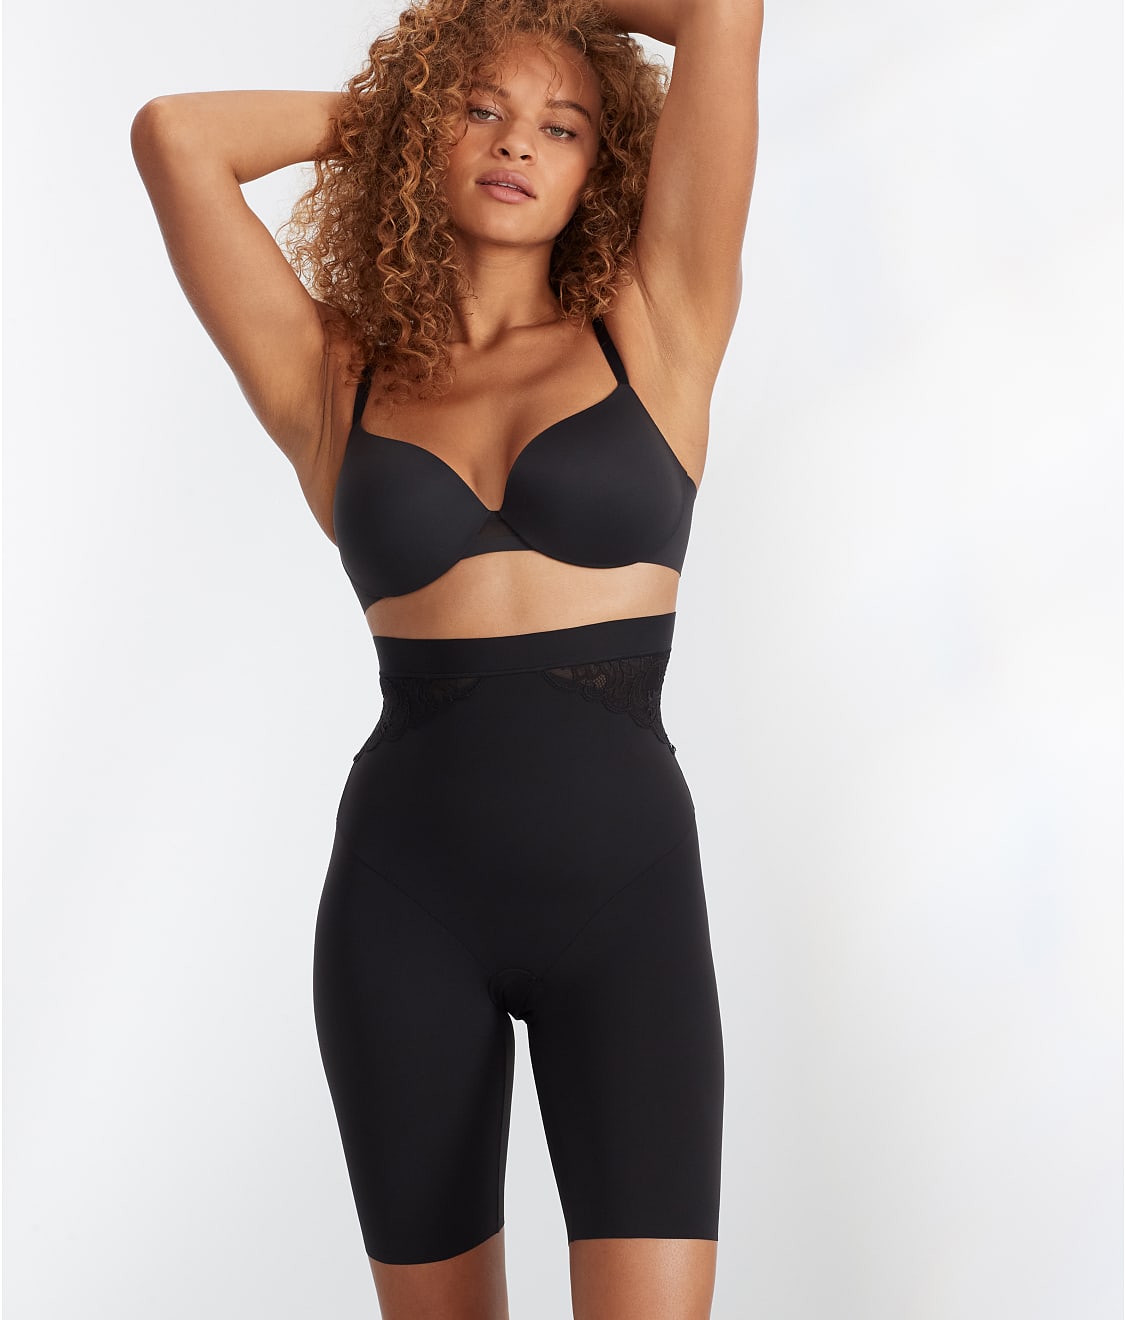 Chantelle Basic Shaping High Waisted Thigh Slimmer